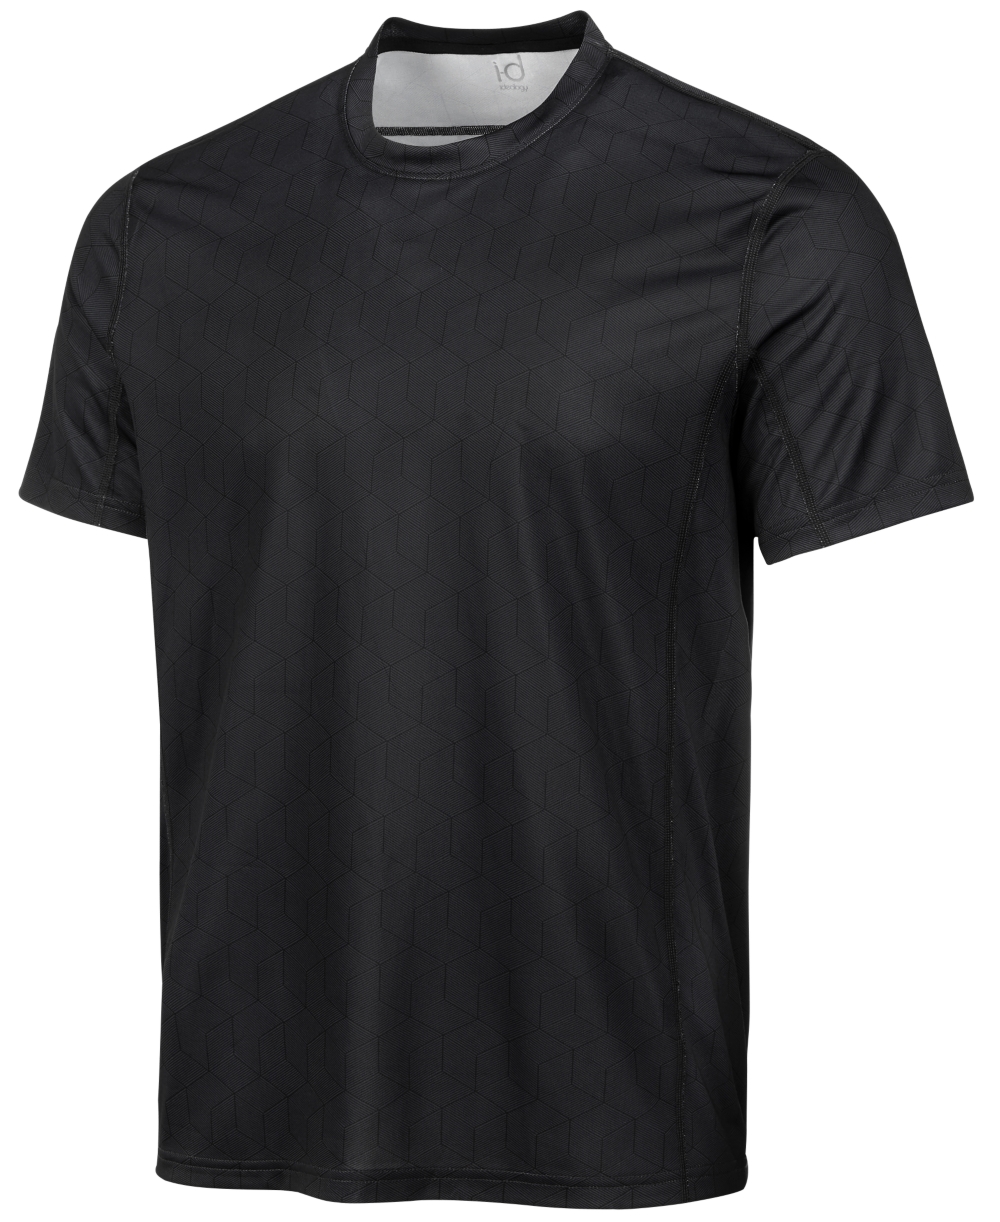 www.couturepoint.com-id-ideology-mens-black-printed-performance-t-shirt